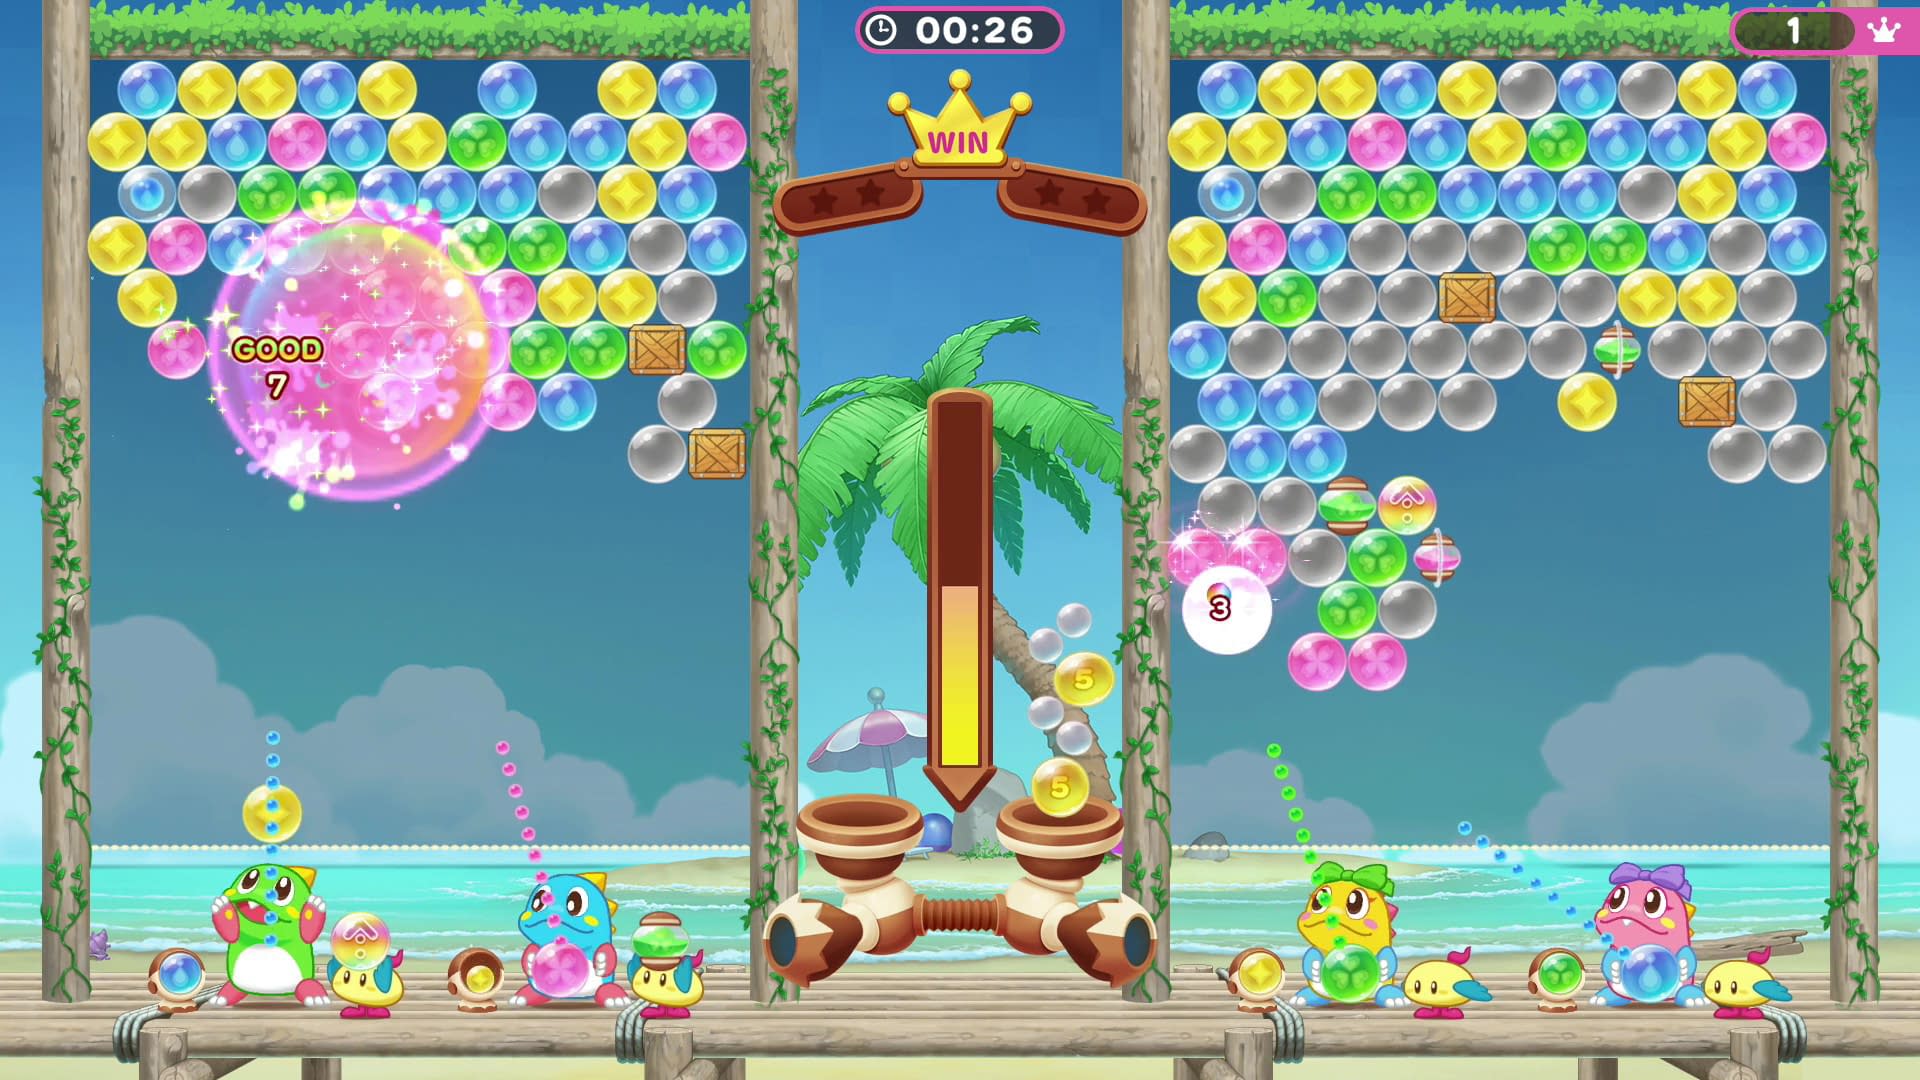 Bubble Shooter Rainbow Game not working  Bubble Shooter Rainbow Game not  opening & starting loading 